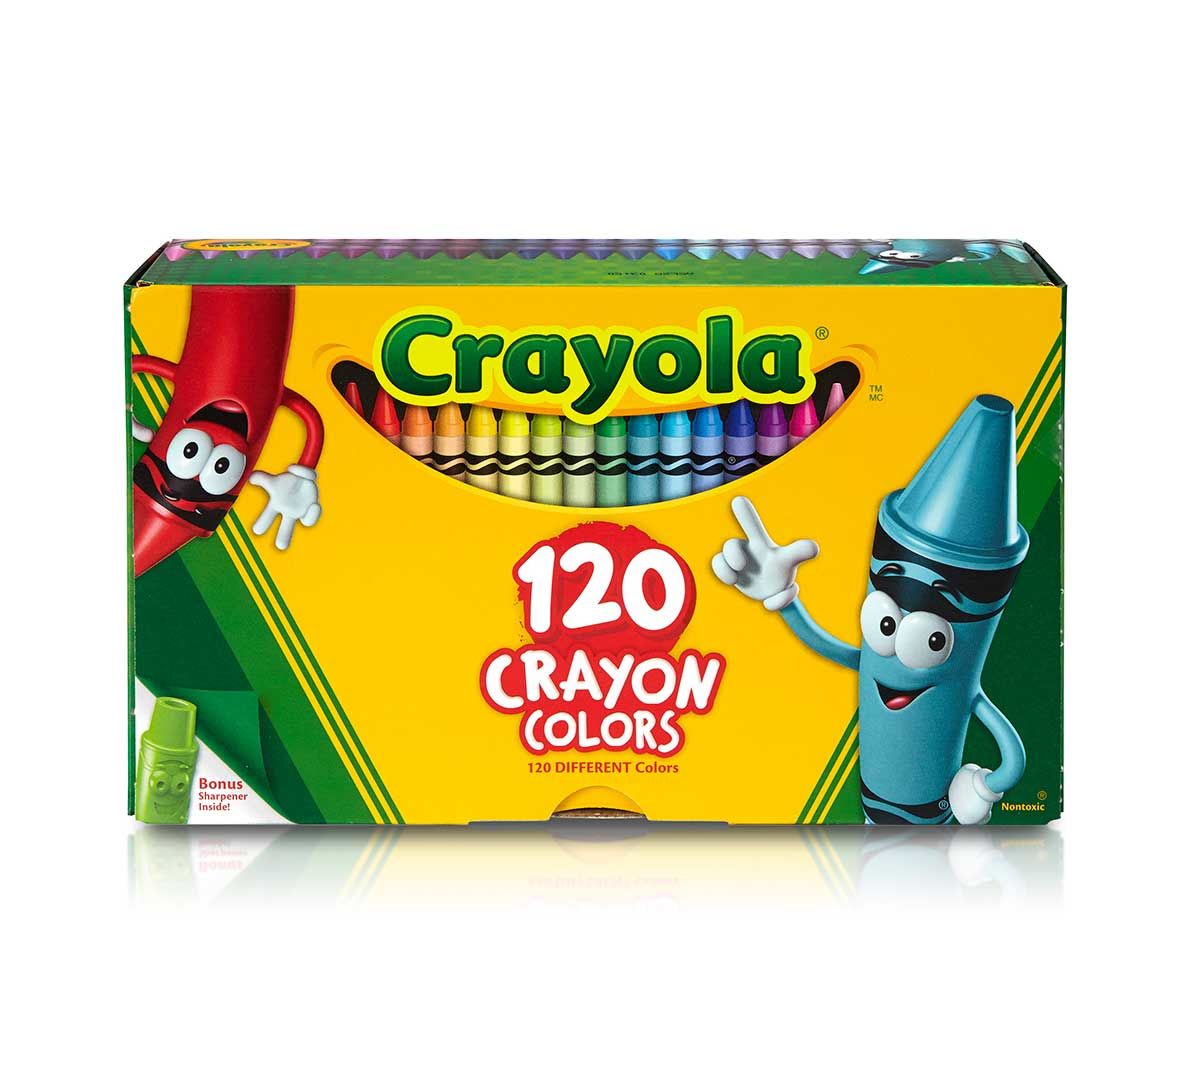 CRAYONS BULK GOLD 12 PACK – Scribbles Crafts – Brooklyn's Premier Crafting  Resource